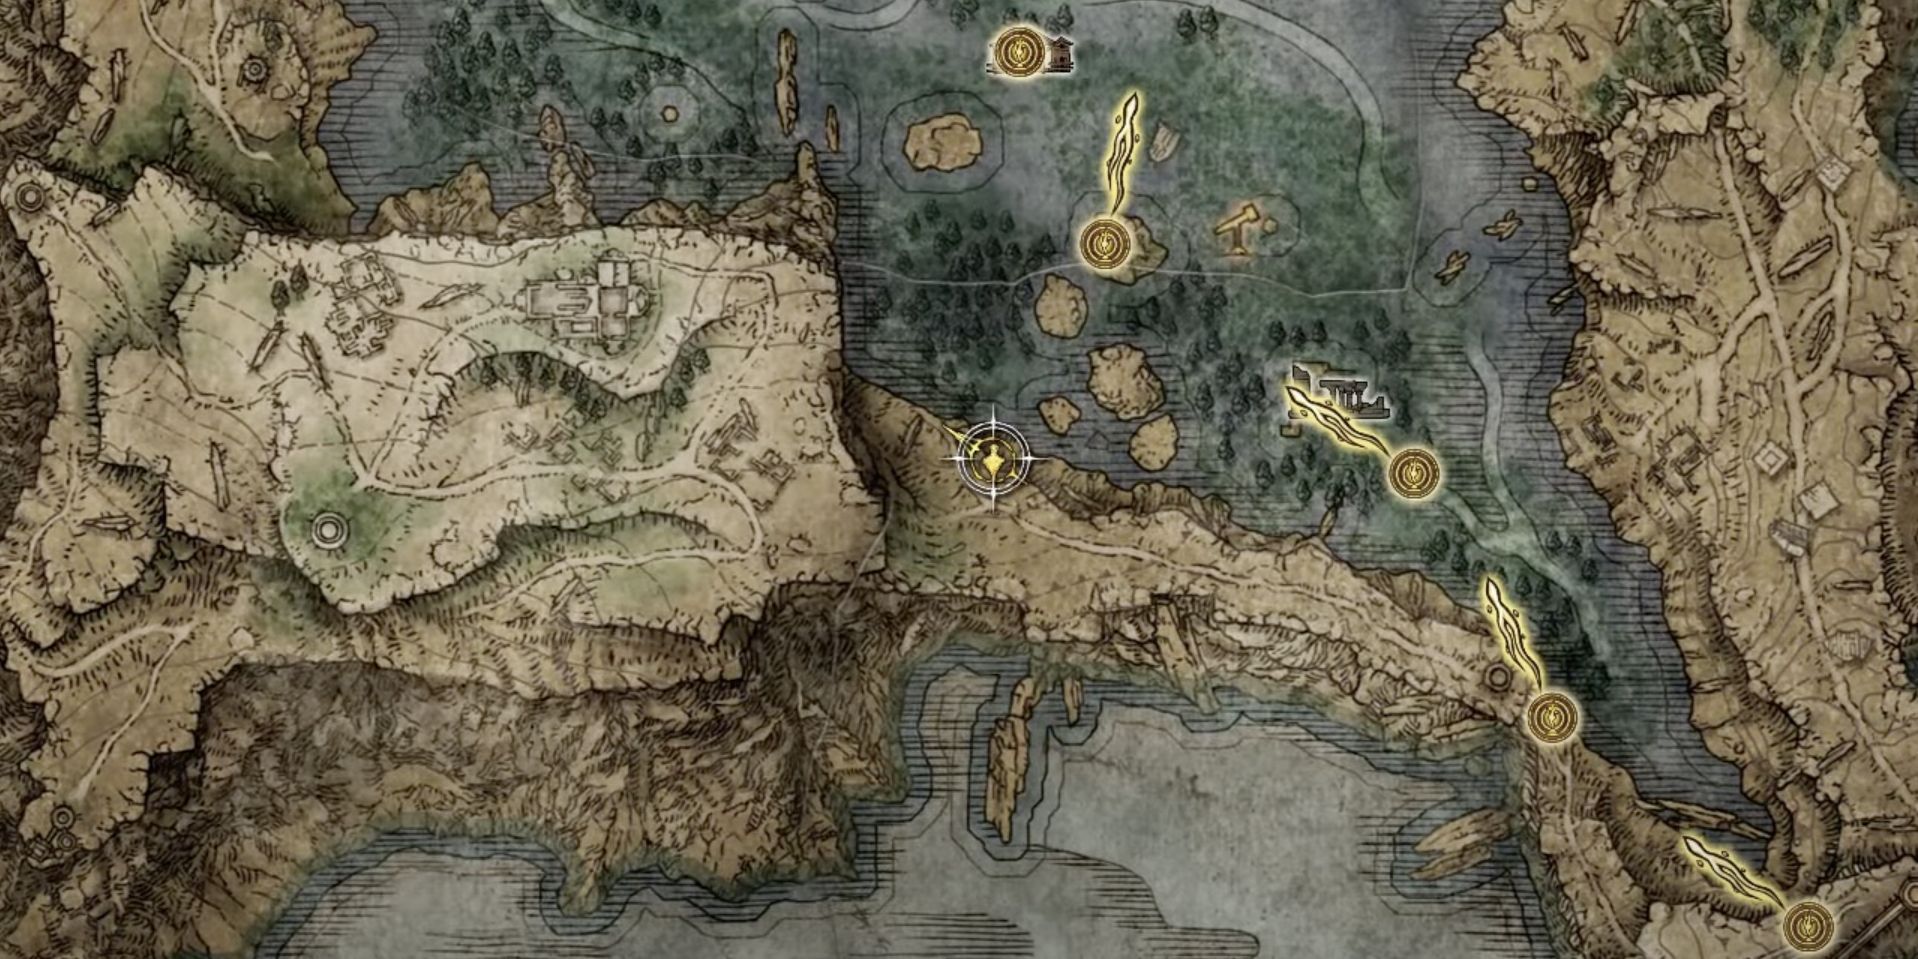 The village is in west of Elden Ring' Map